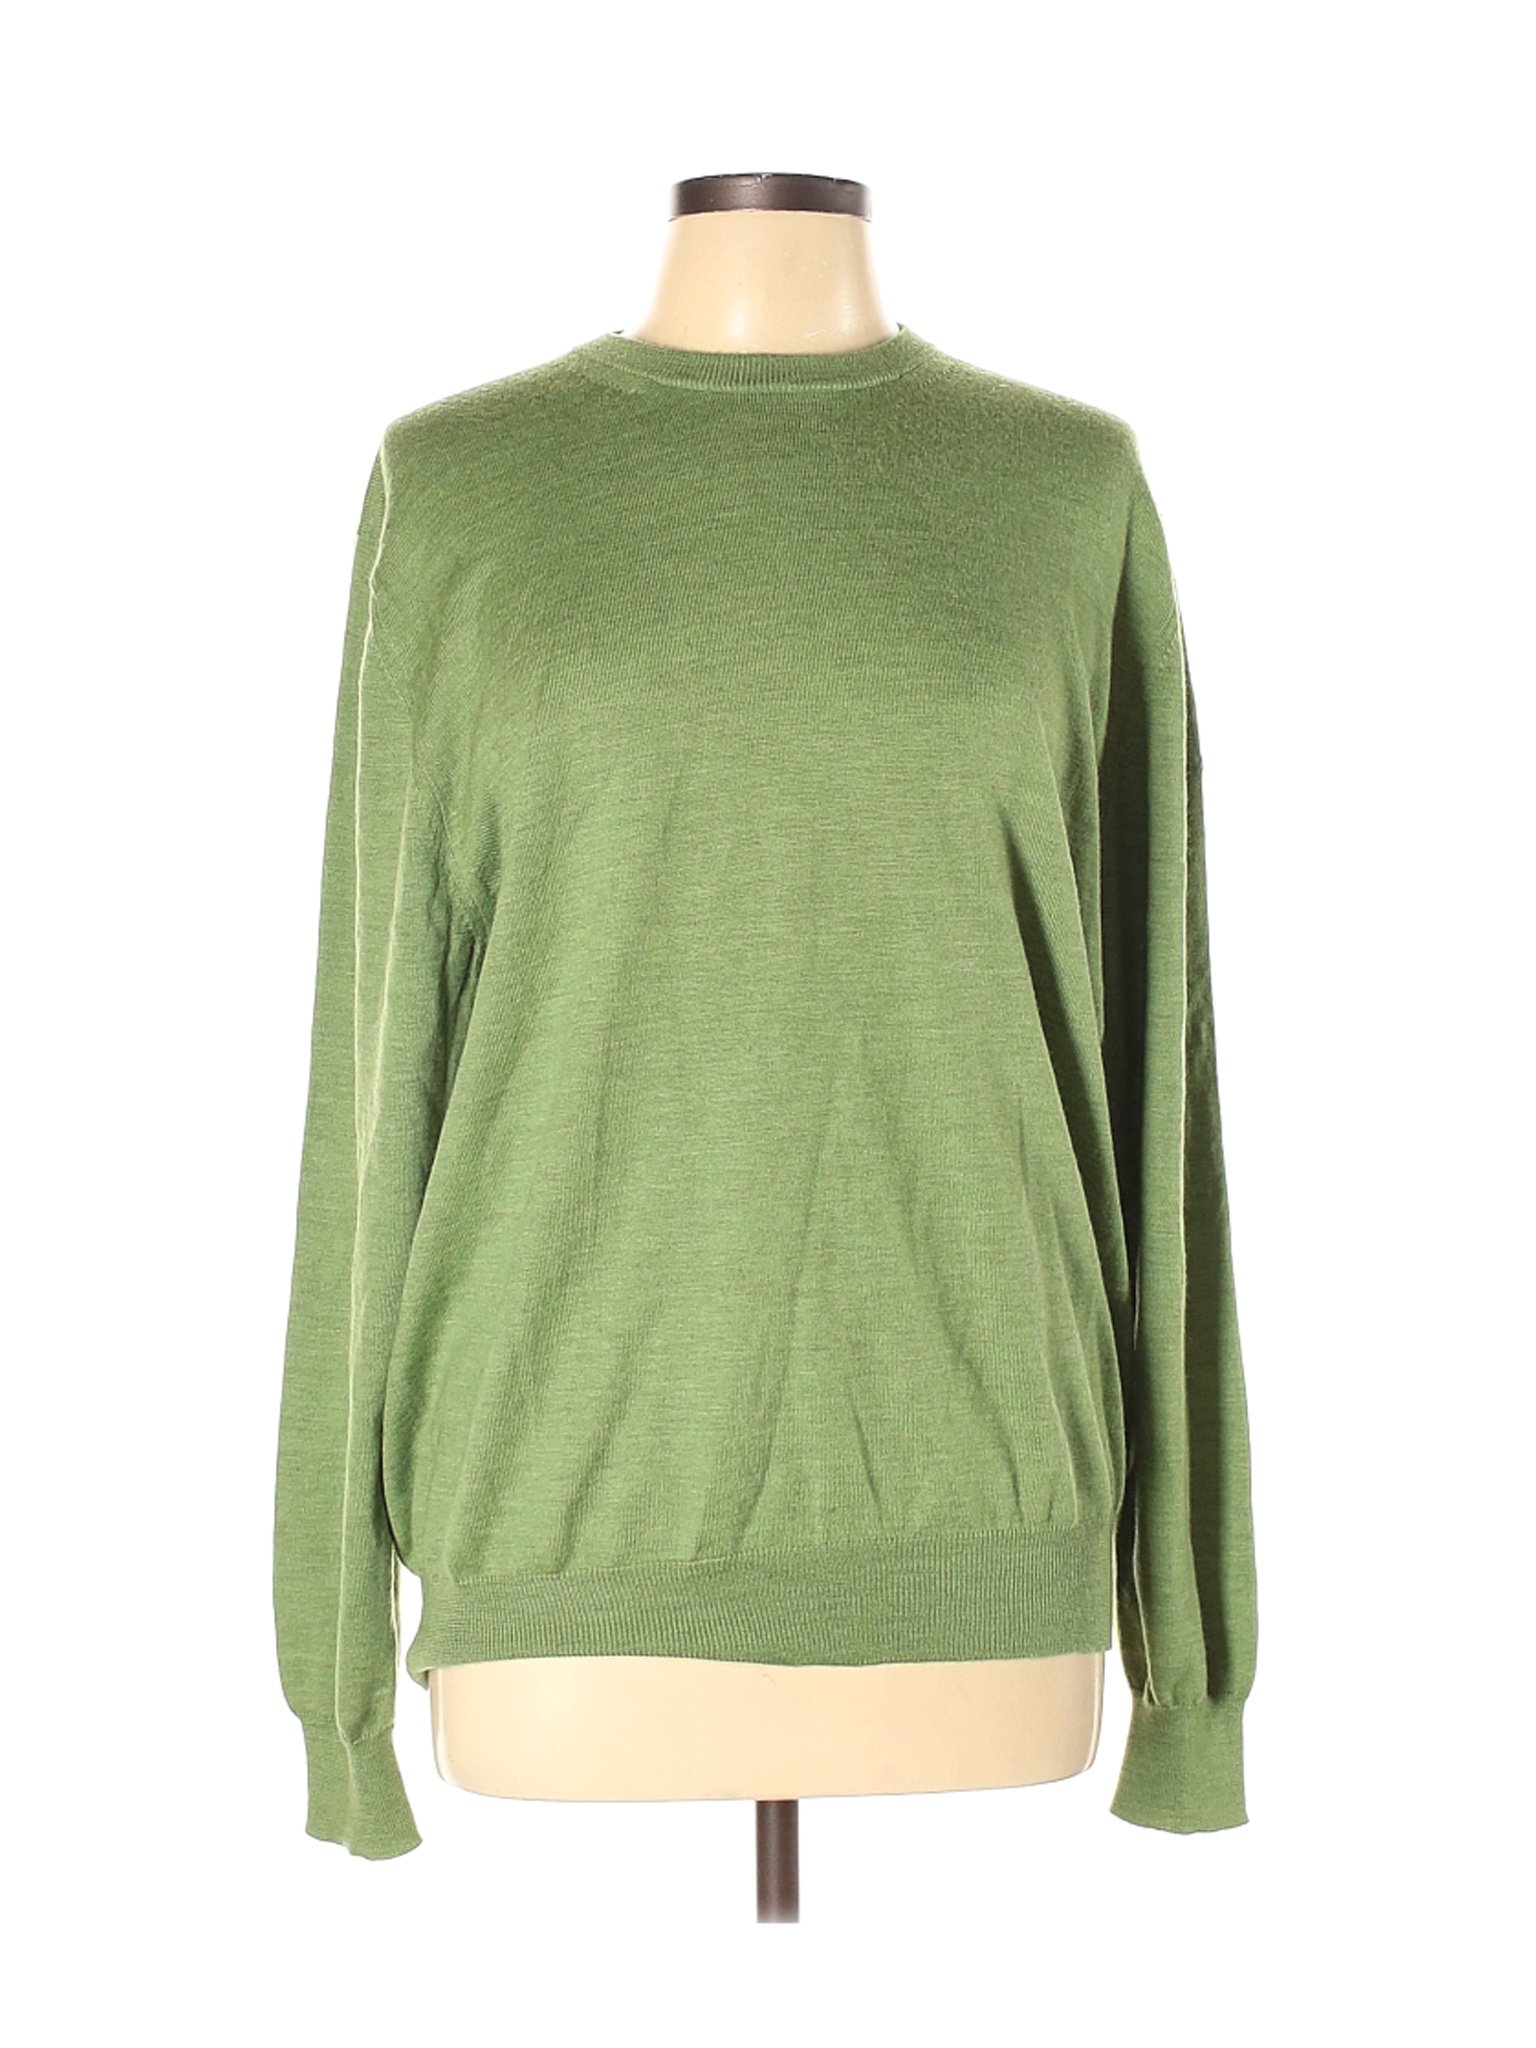 Faconnable 100% Merino Wool Color Block Green Wool Pullover Sweater ...